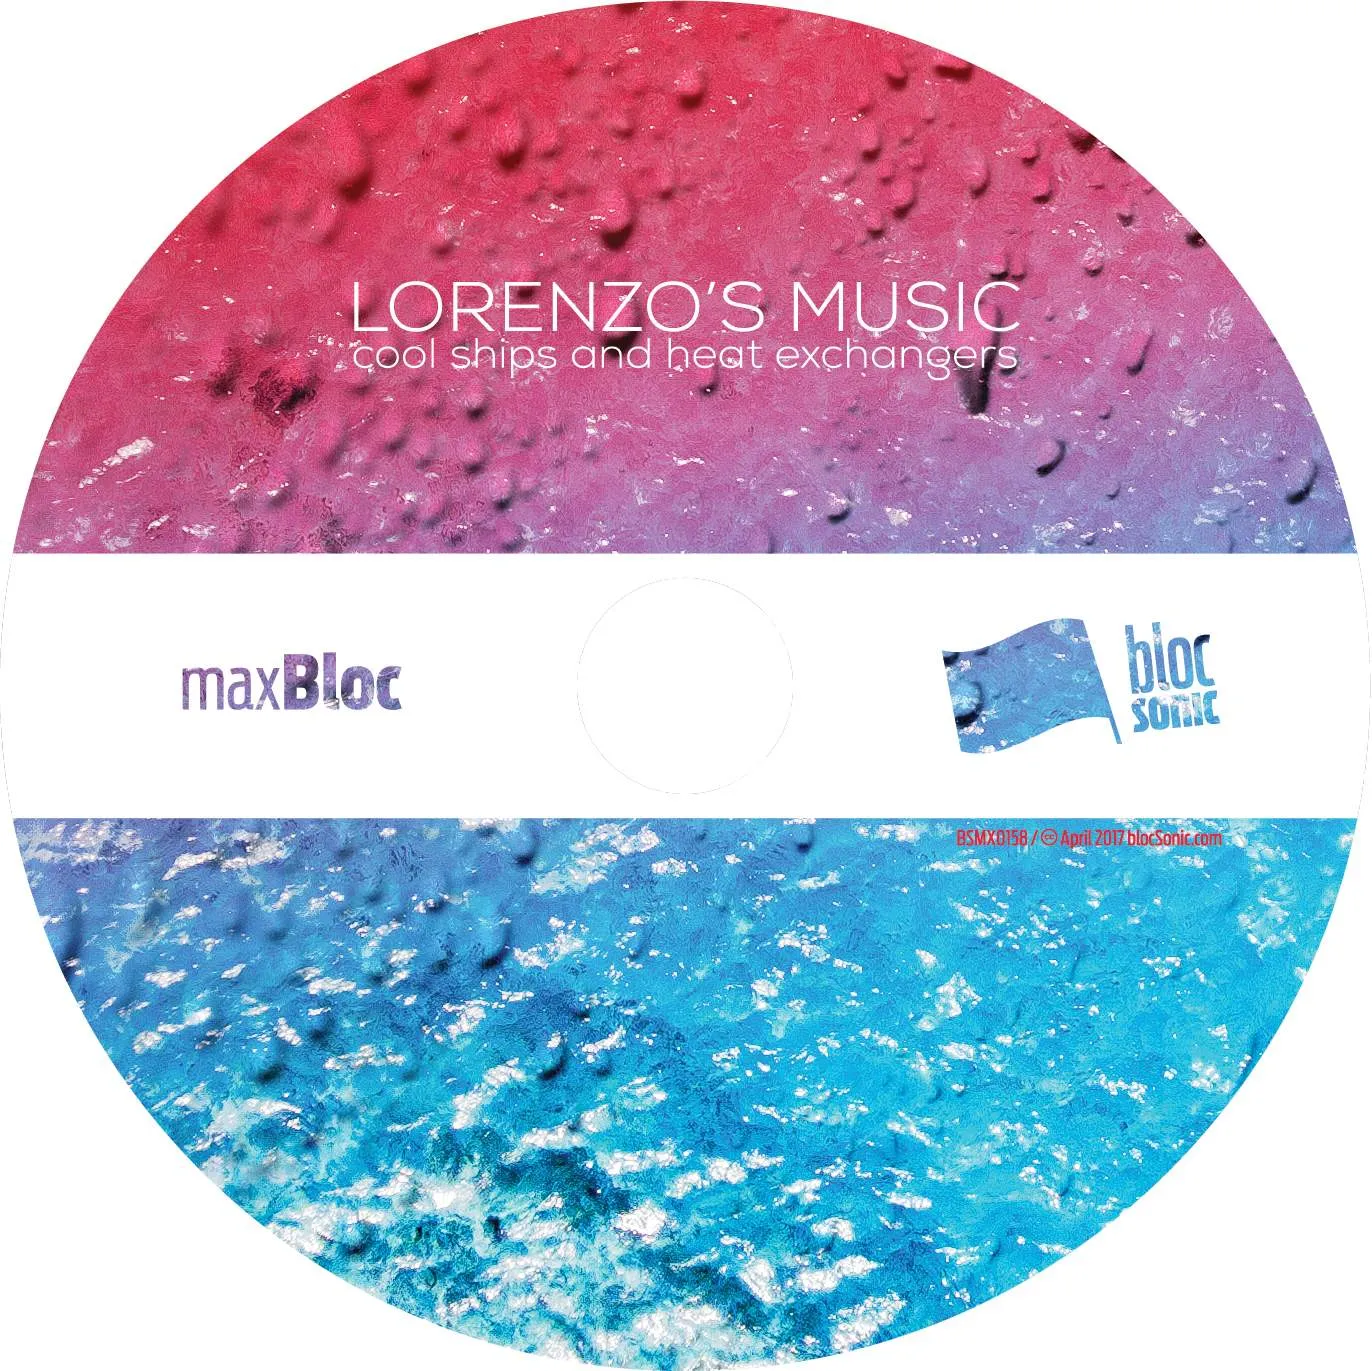 Album disc for “Cool ships and heat exchangers” by Lorenzo's Music